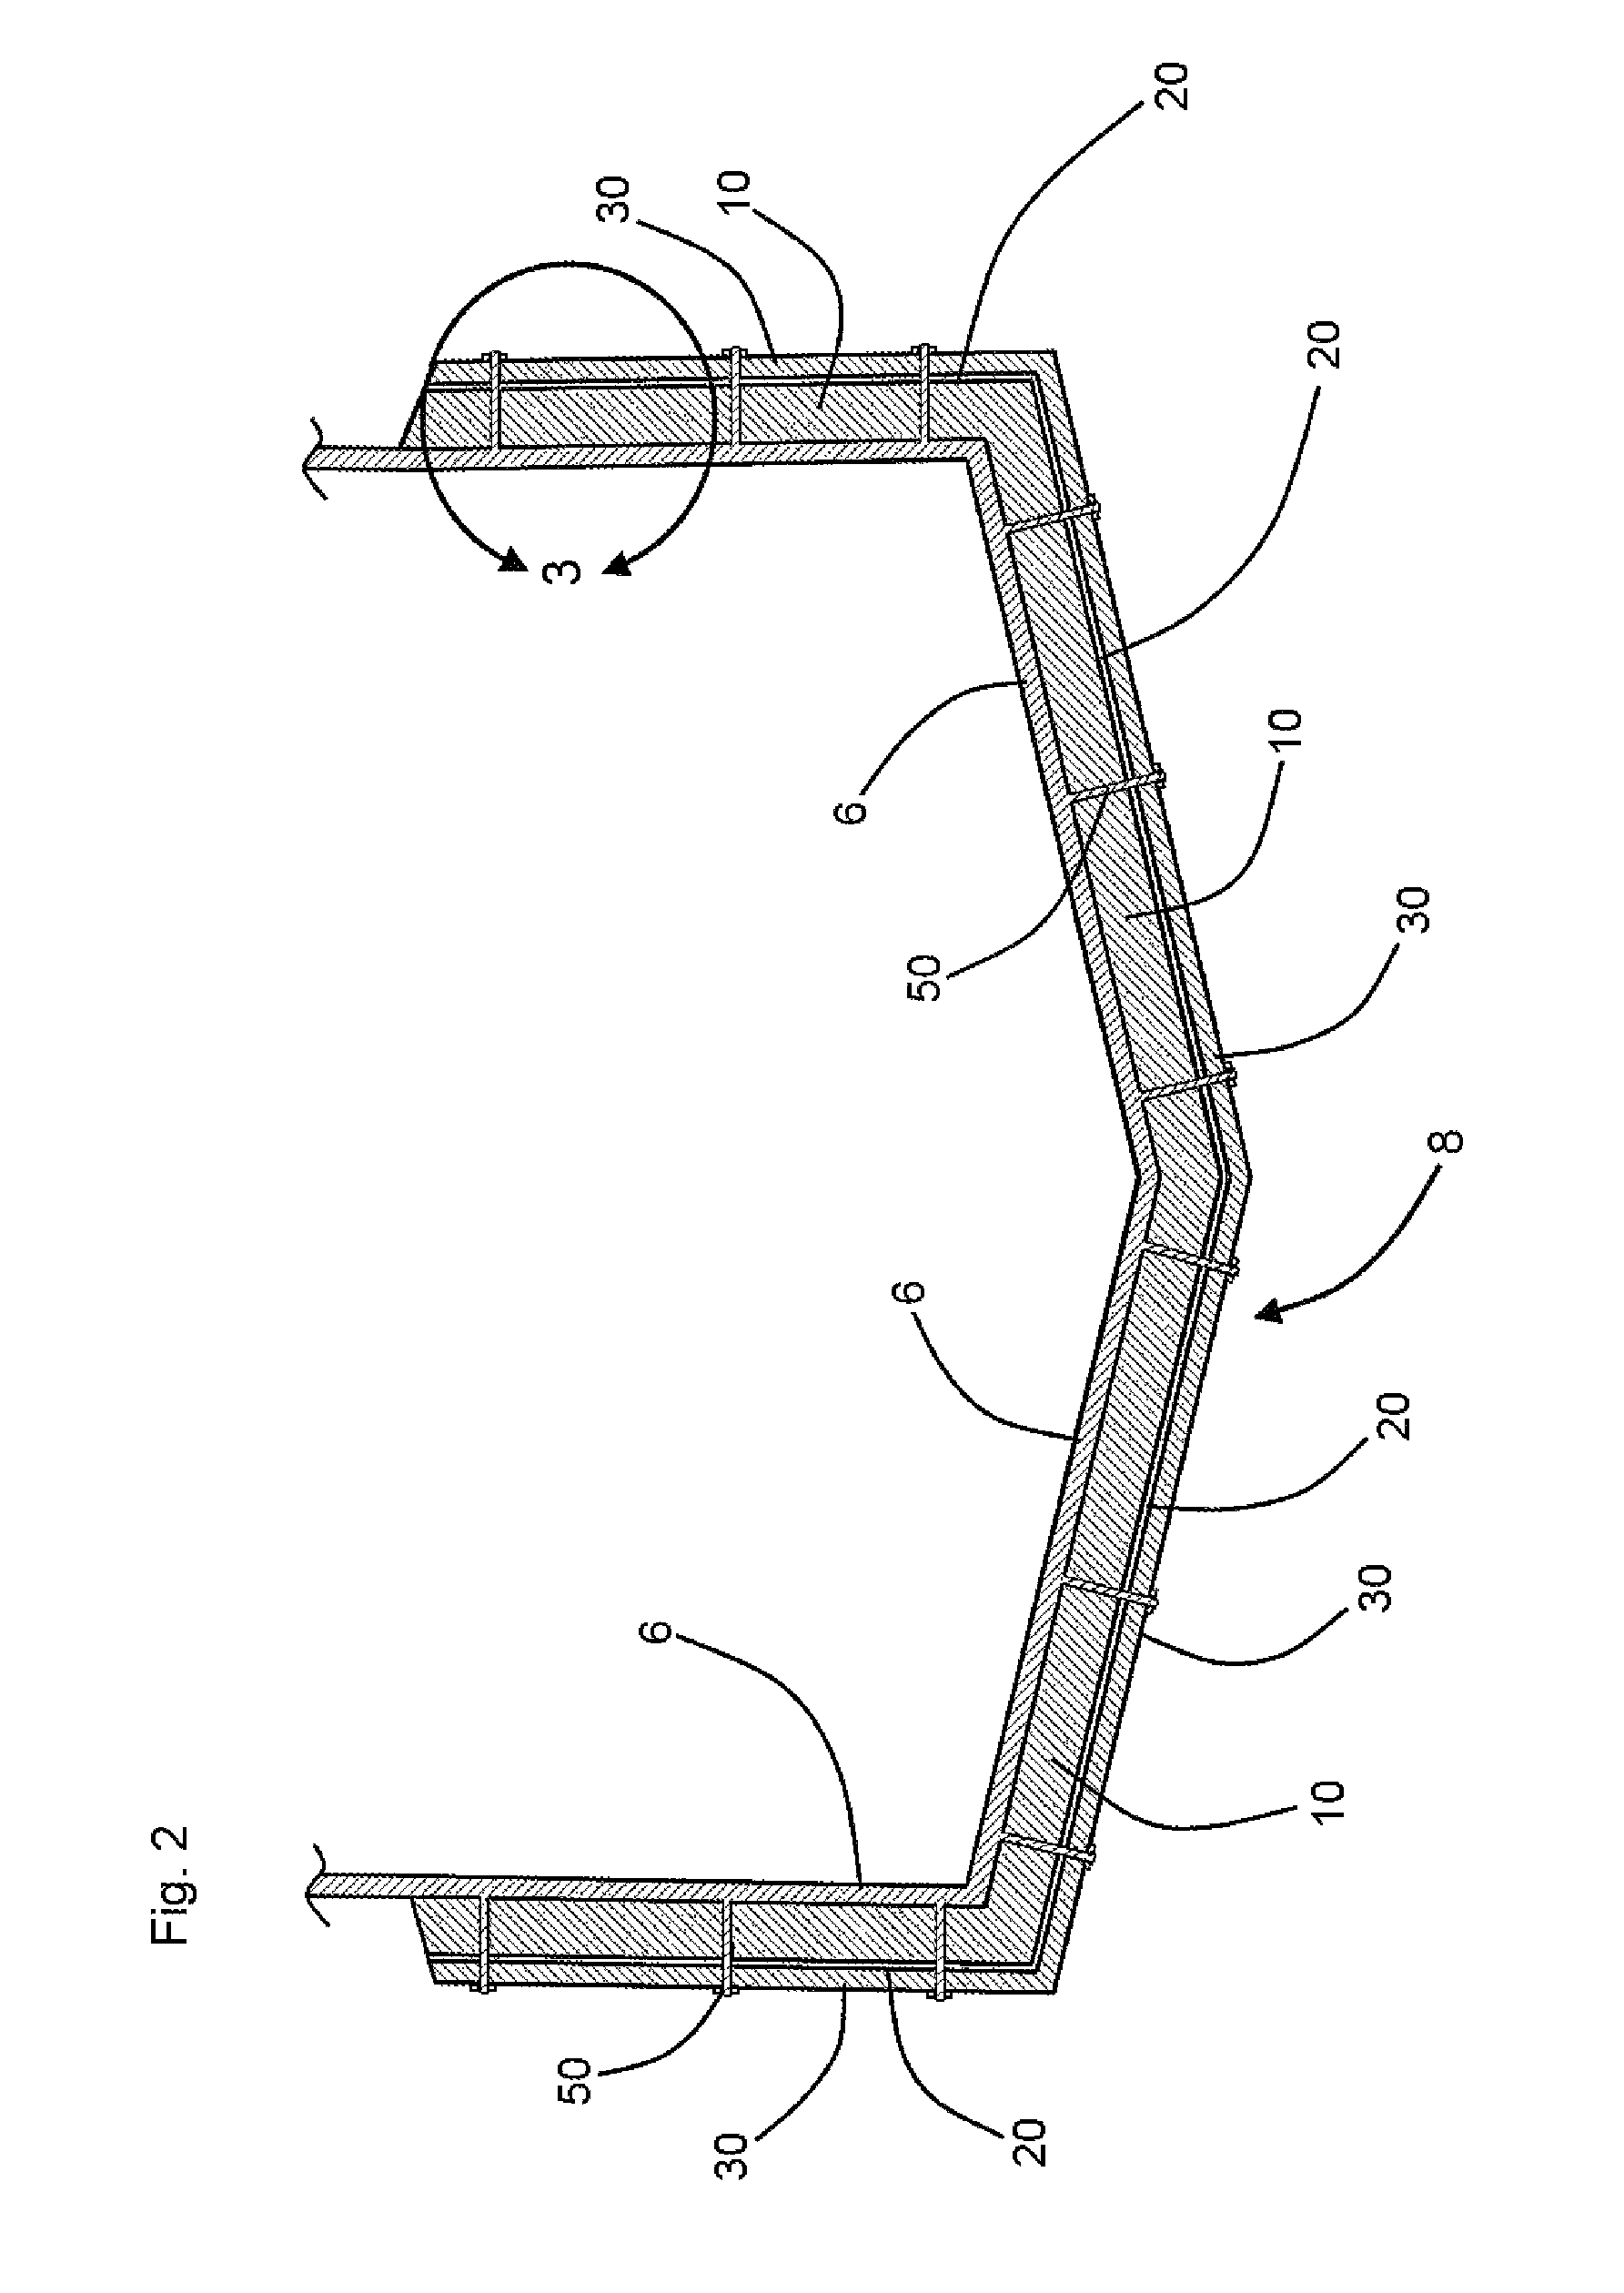 Assembly for armoring an amphibious vehicle against projectile penetrations